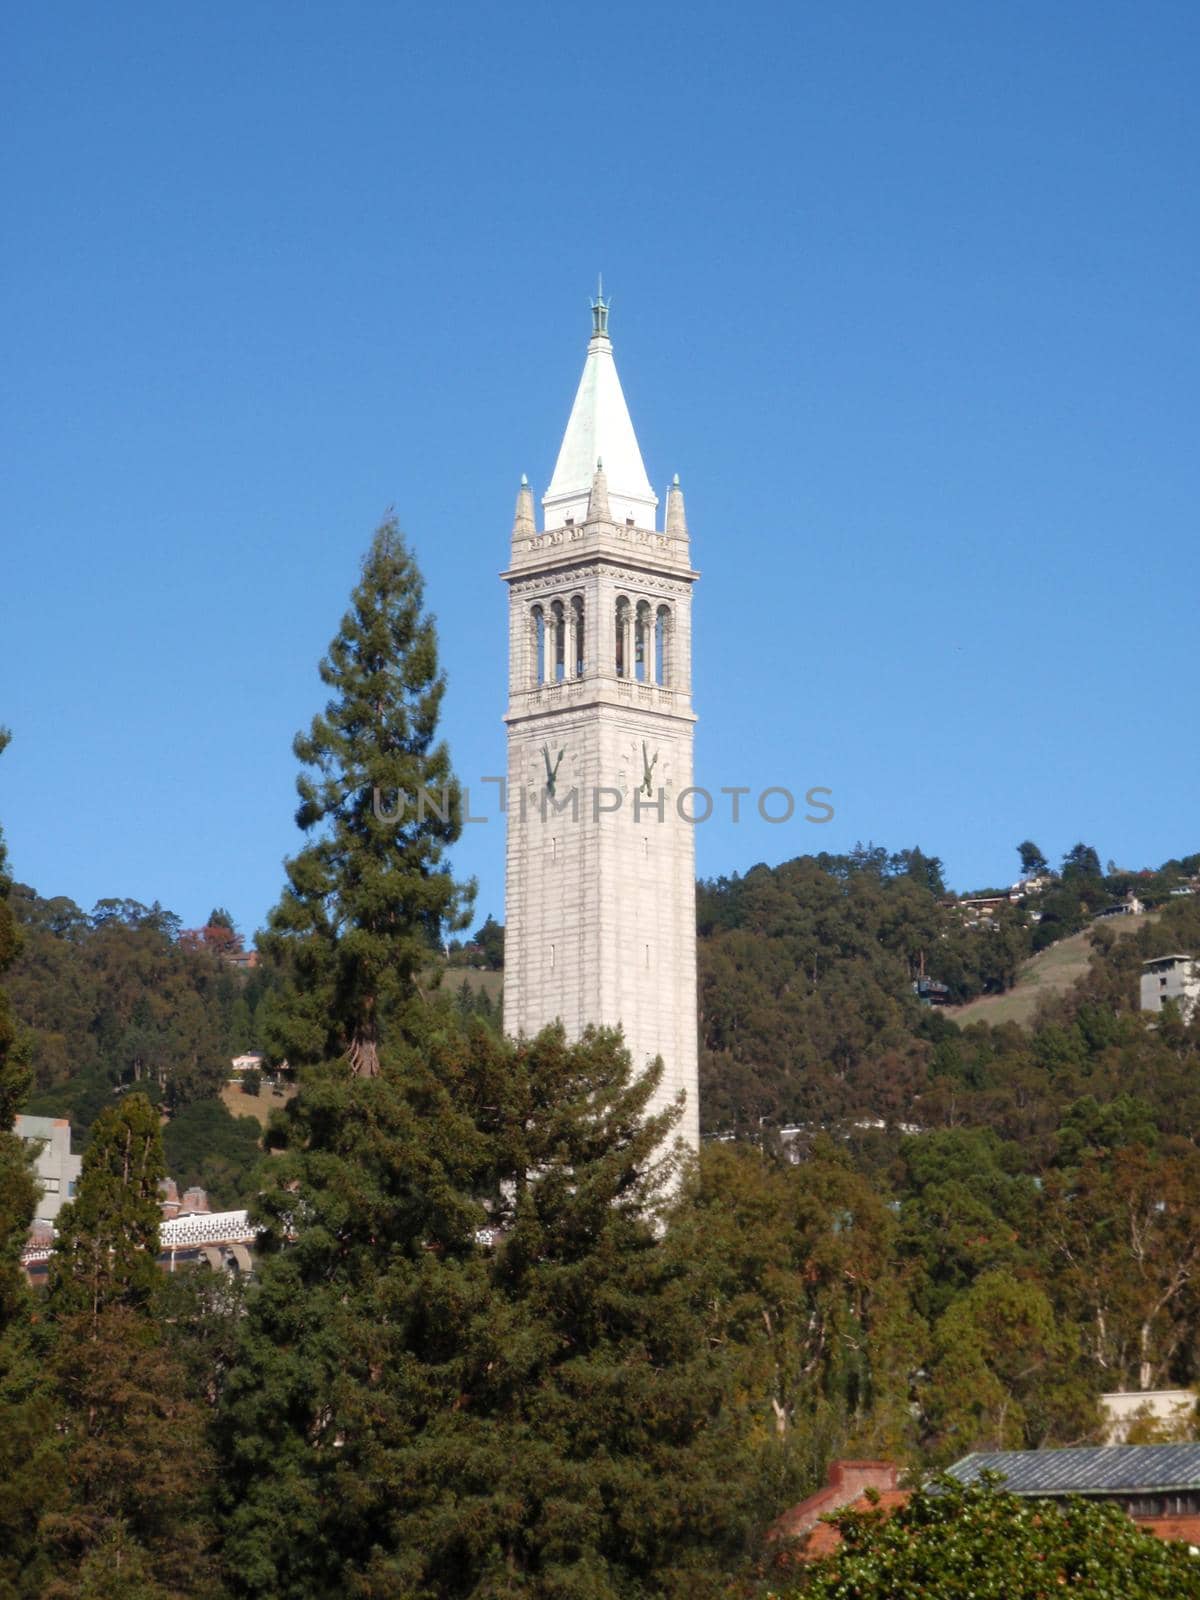 The Campanile also know as the Sather Tower raises above the trees at University of California, Berkeley